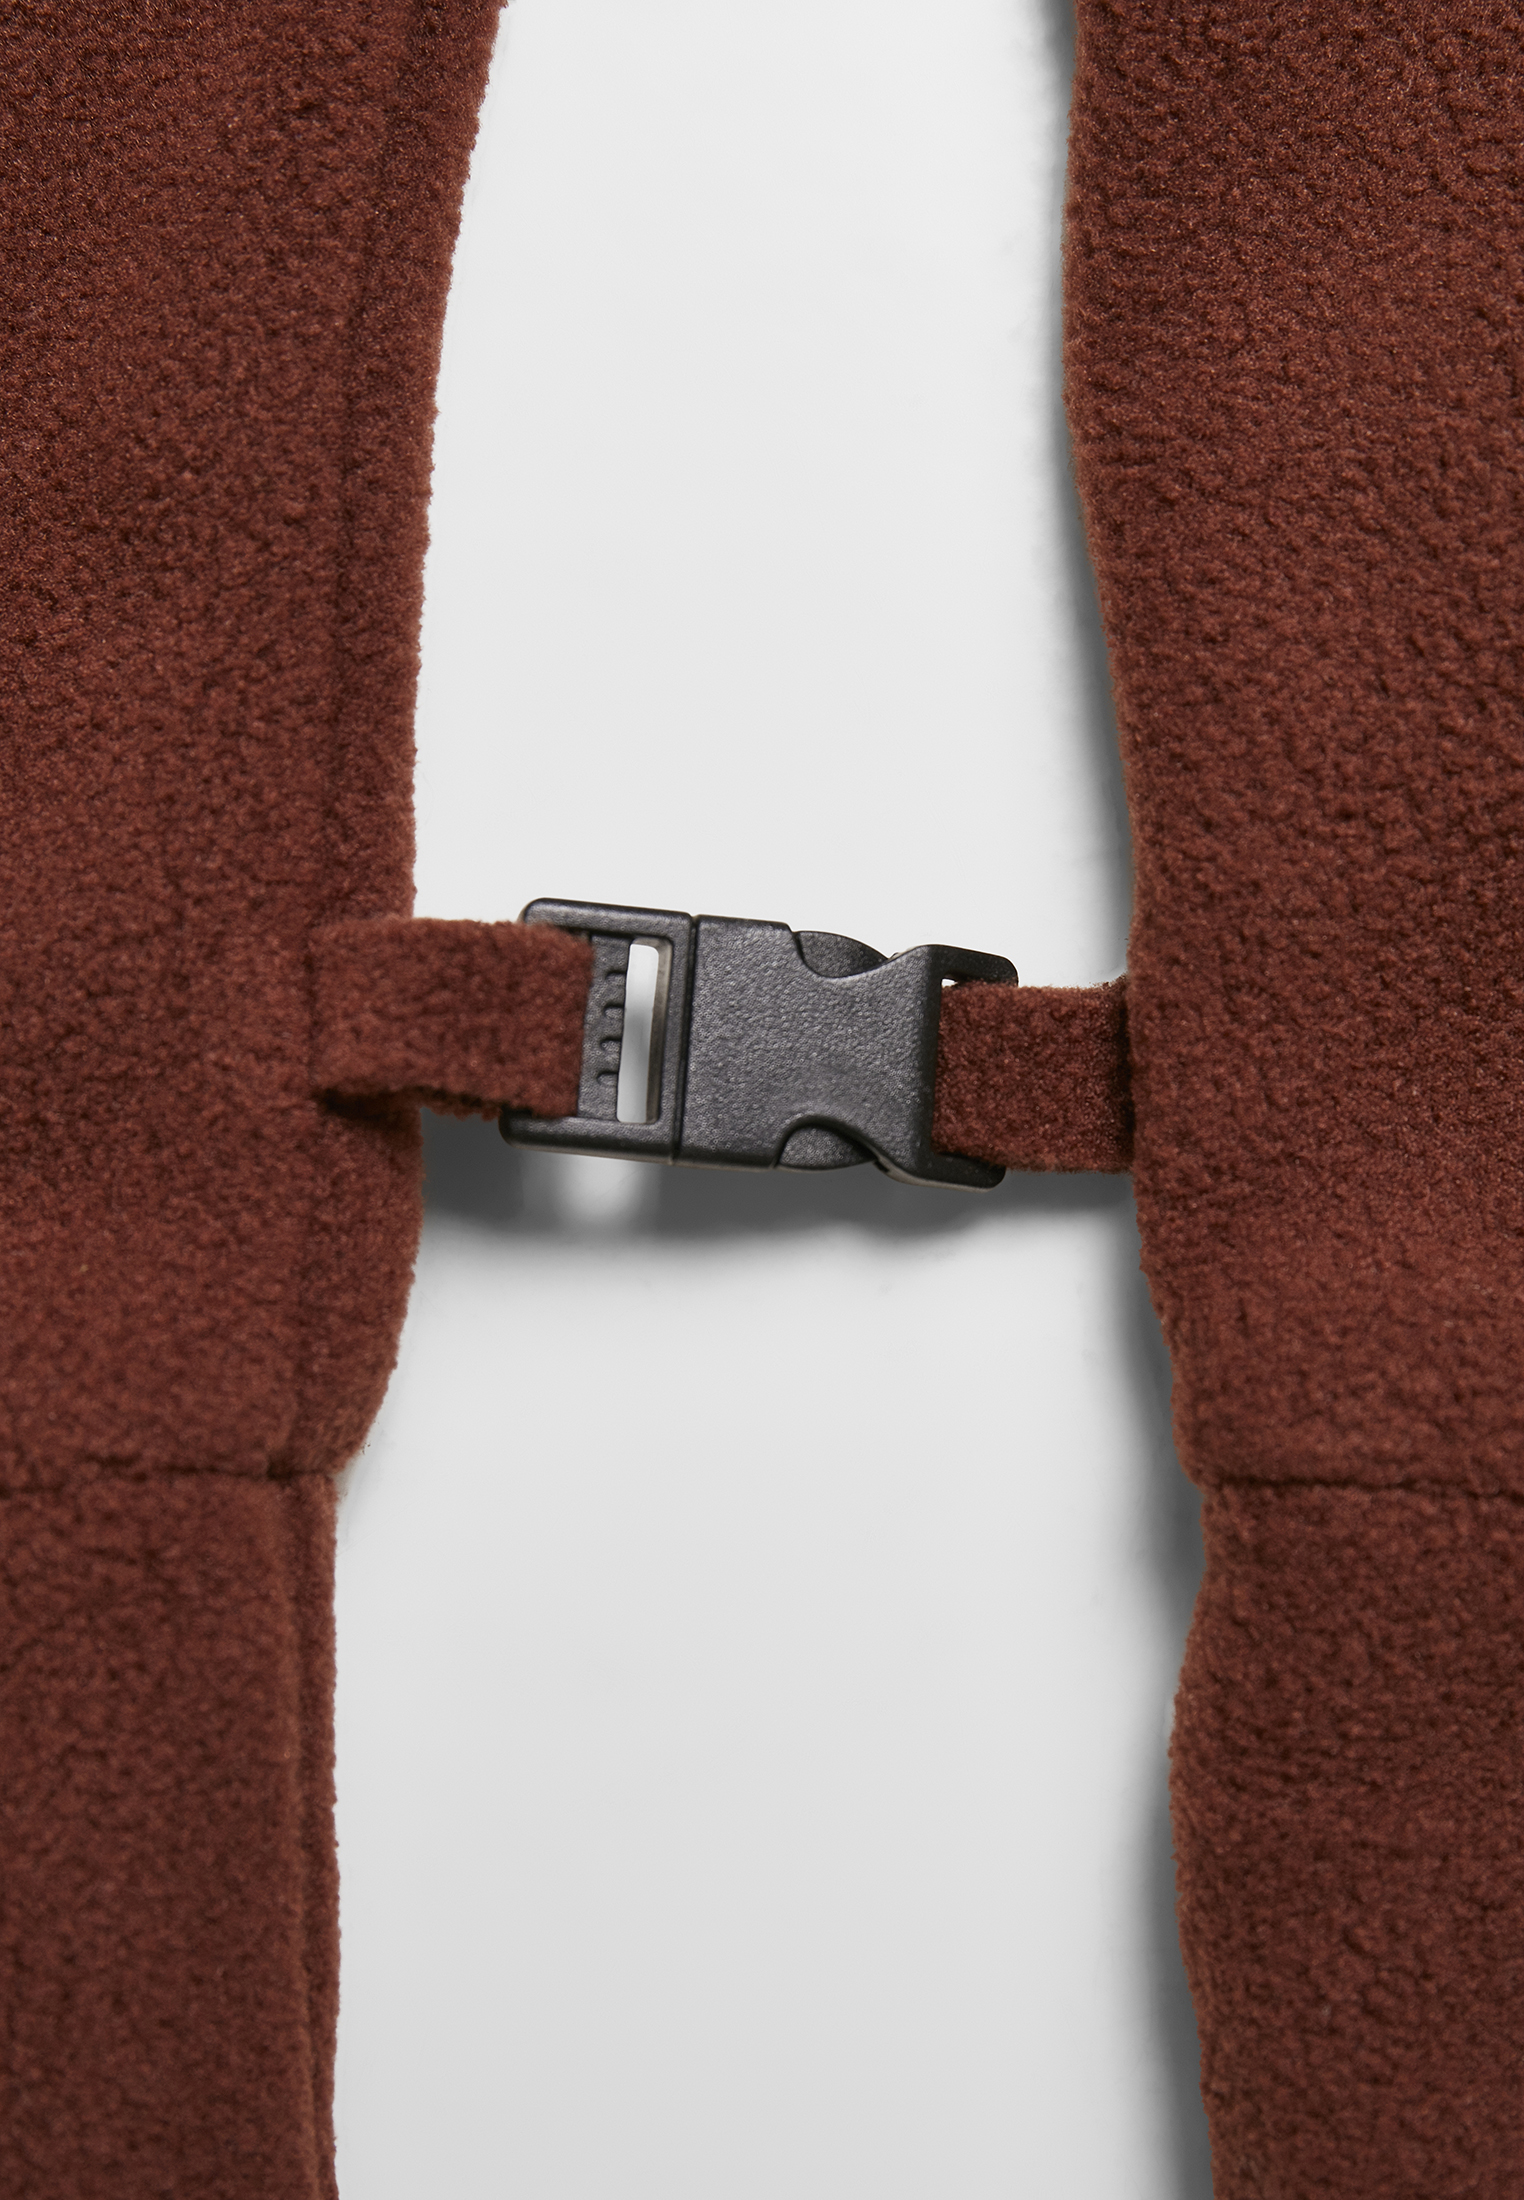 Gadgets Hiking Fleece Set in Farbe toffee